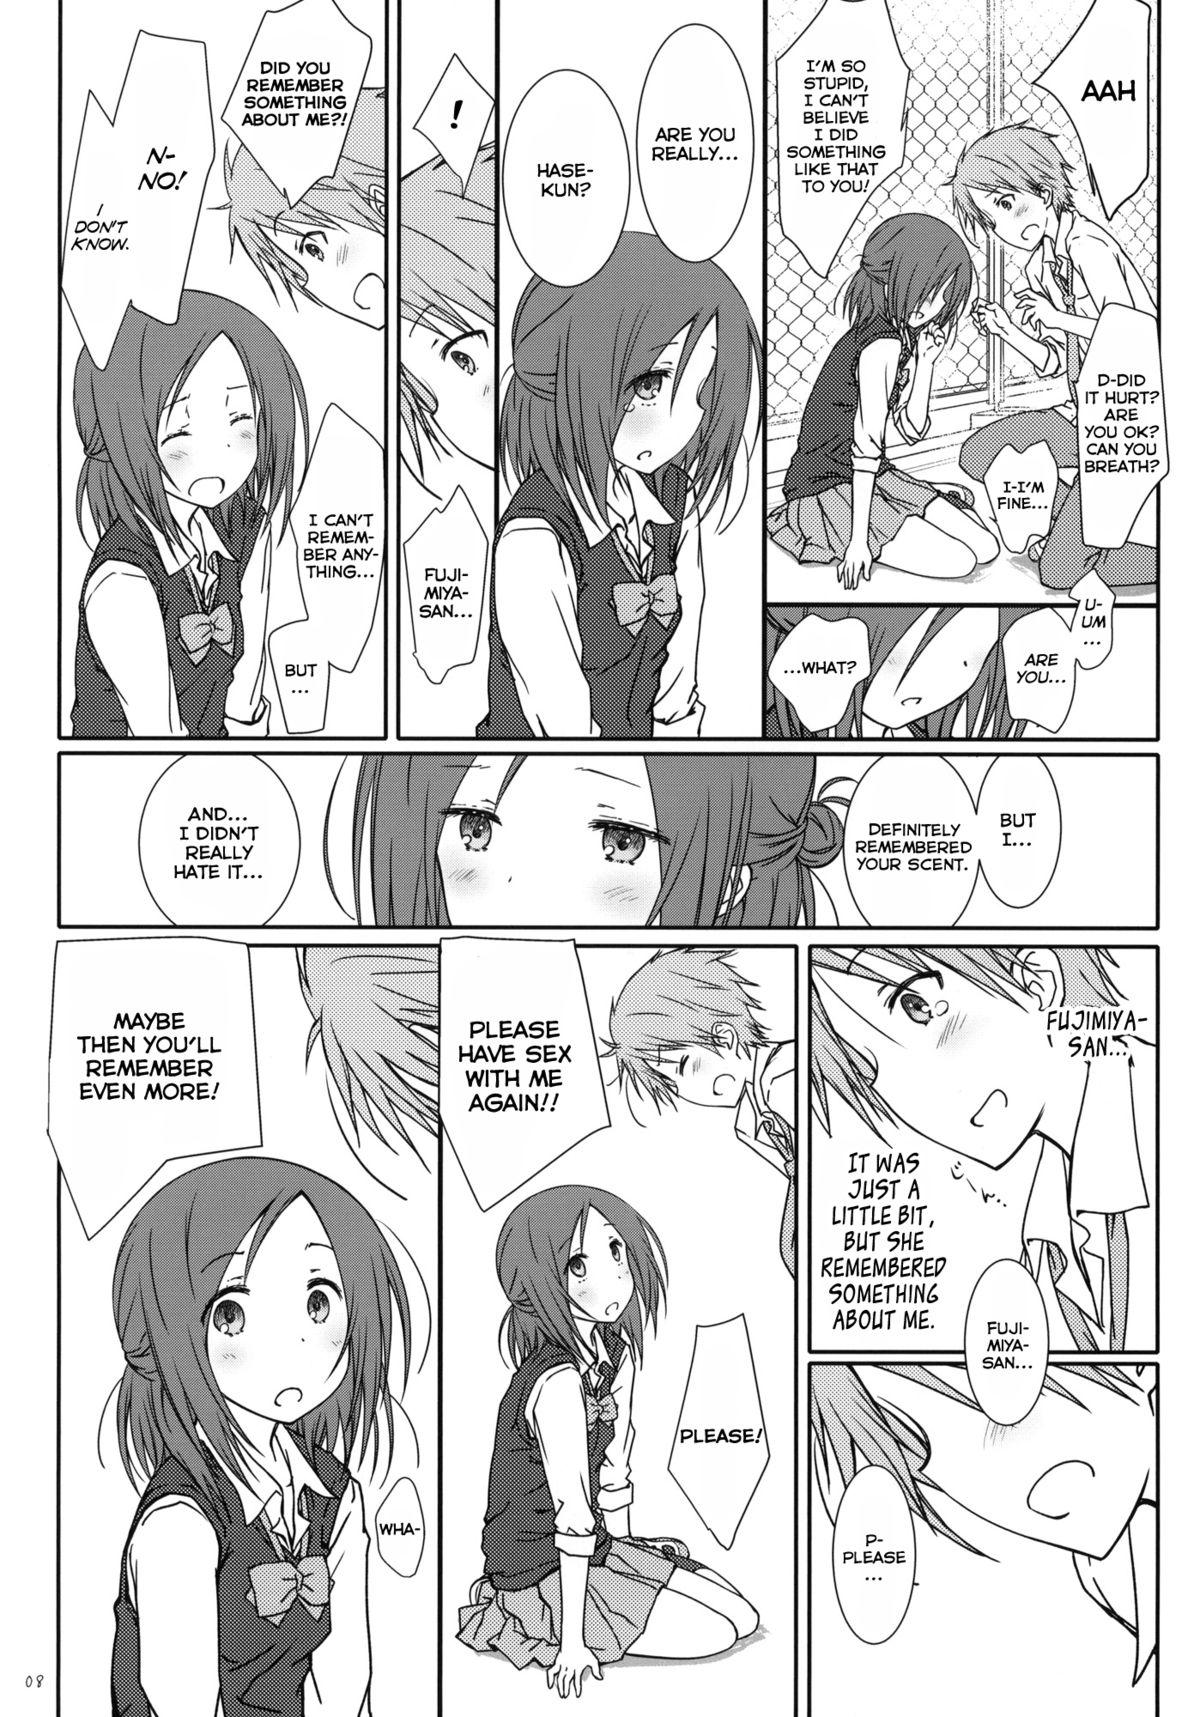 Sloppy Blowjob "Tomodachi to no Sex." - One week friends French - Page 7